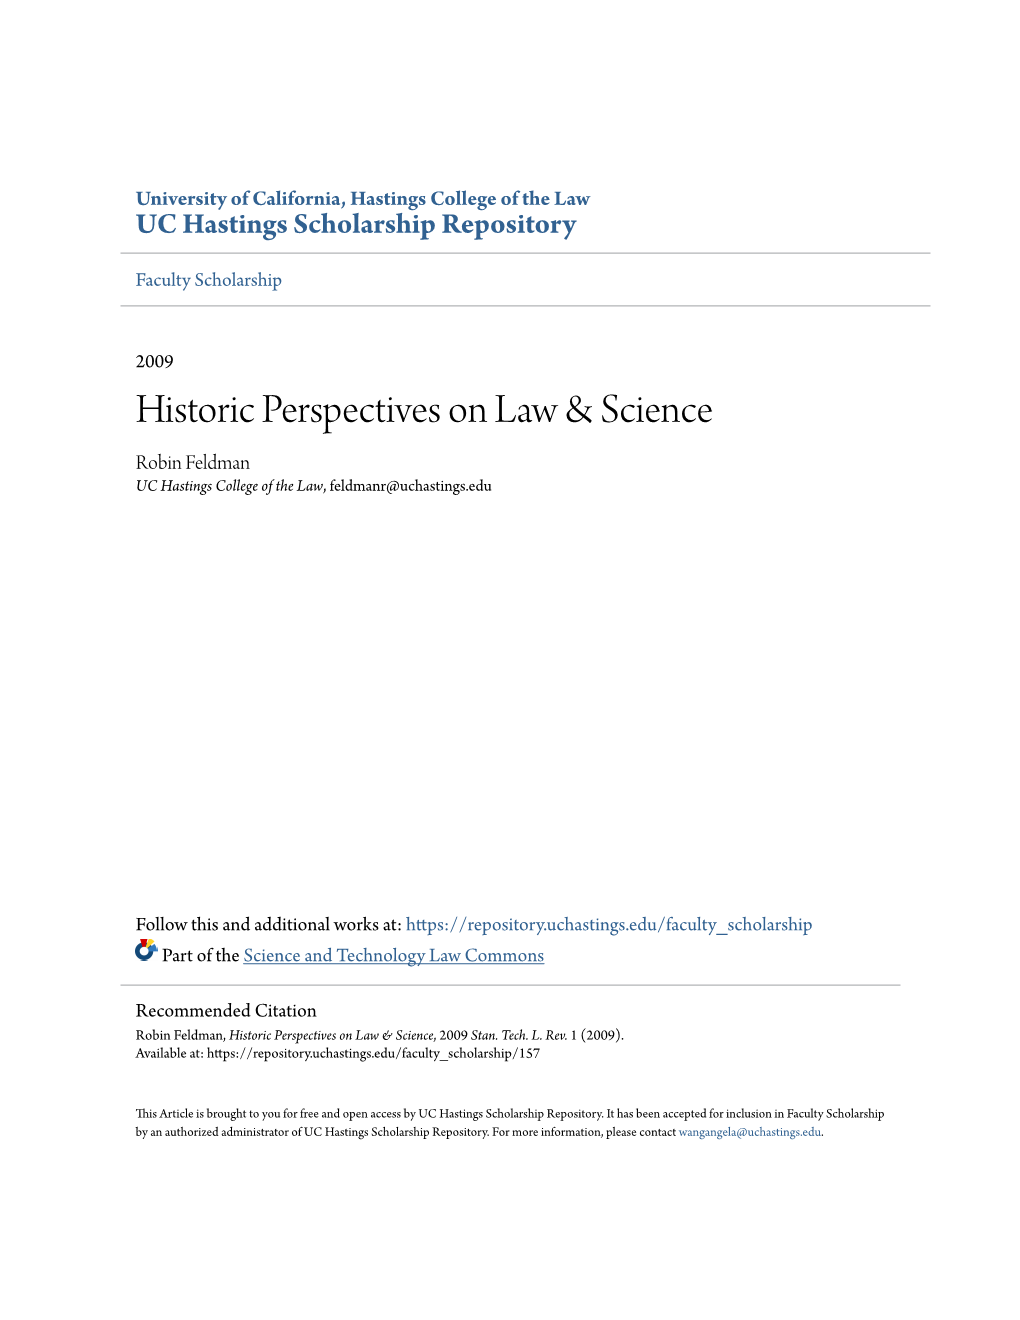 Historic Perspectives on Law & Science